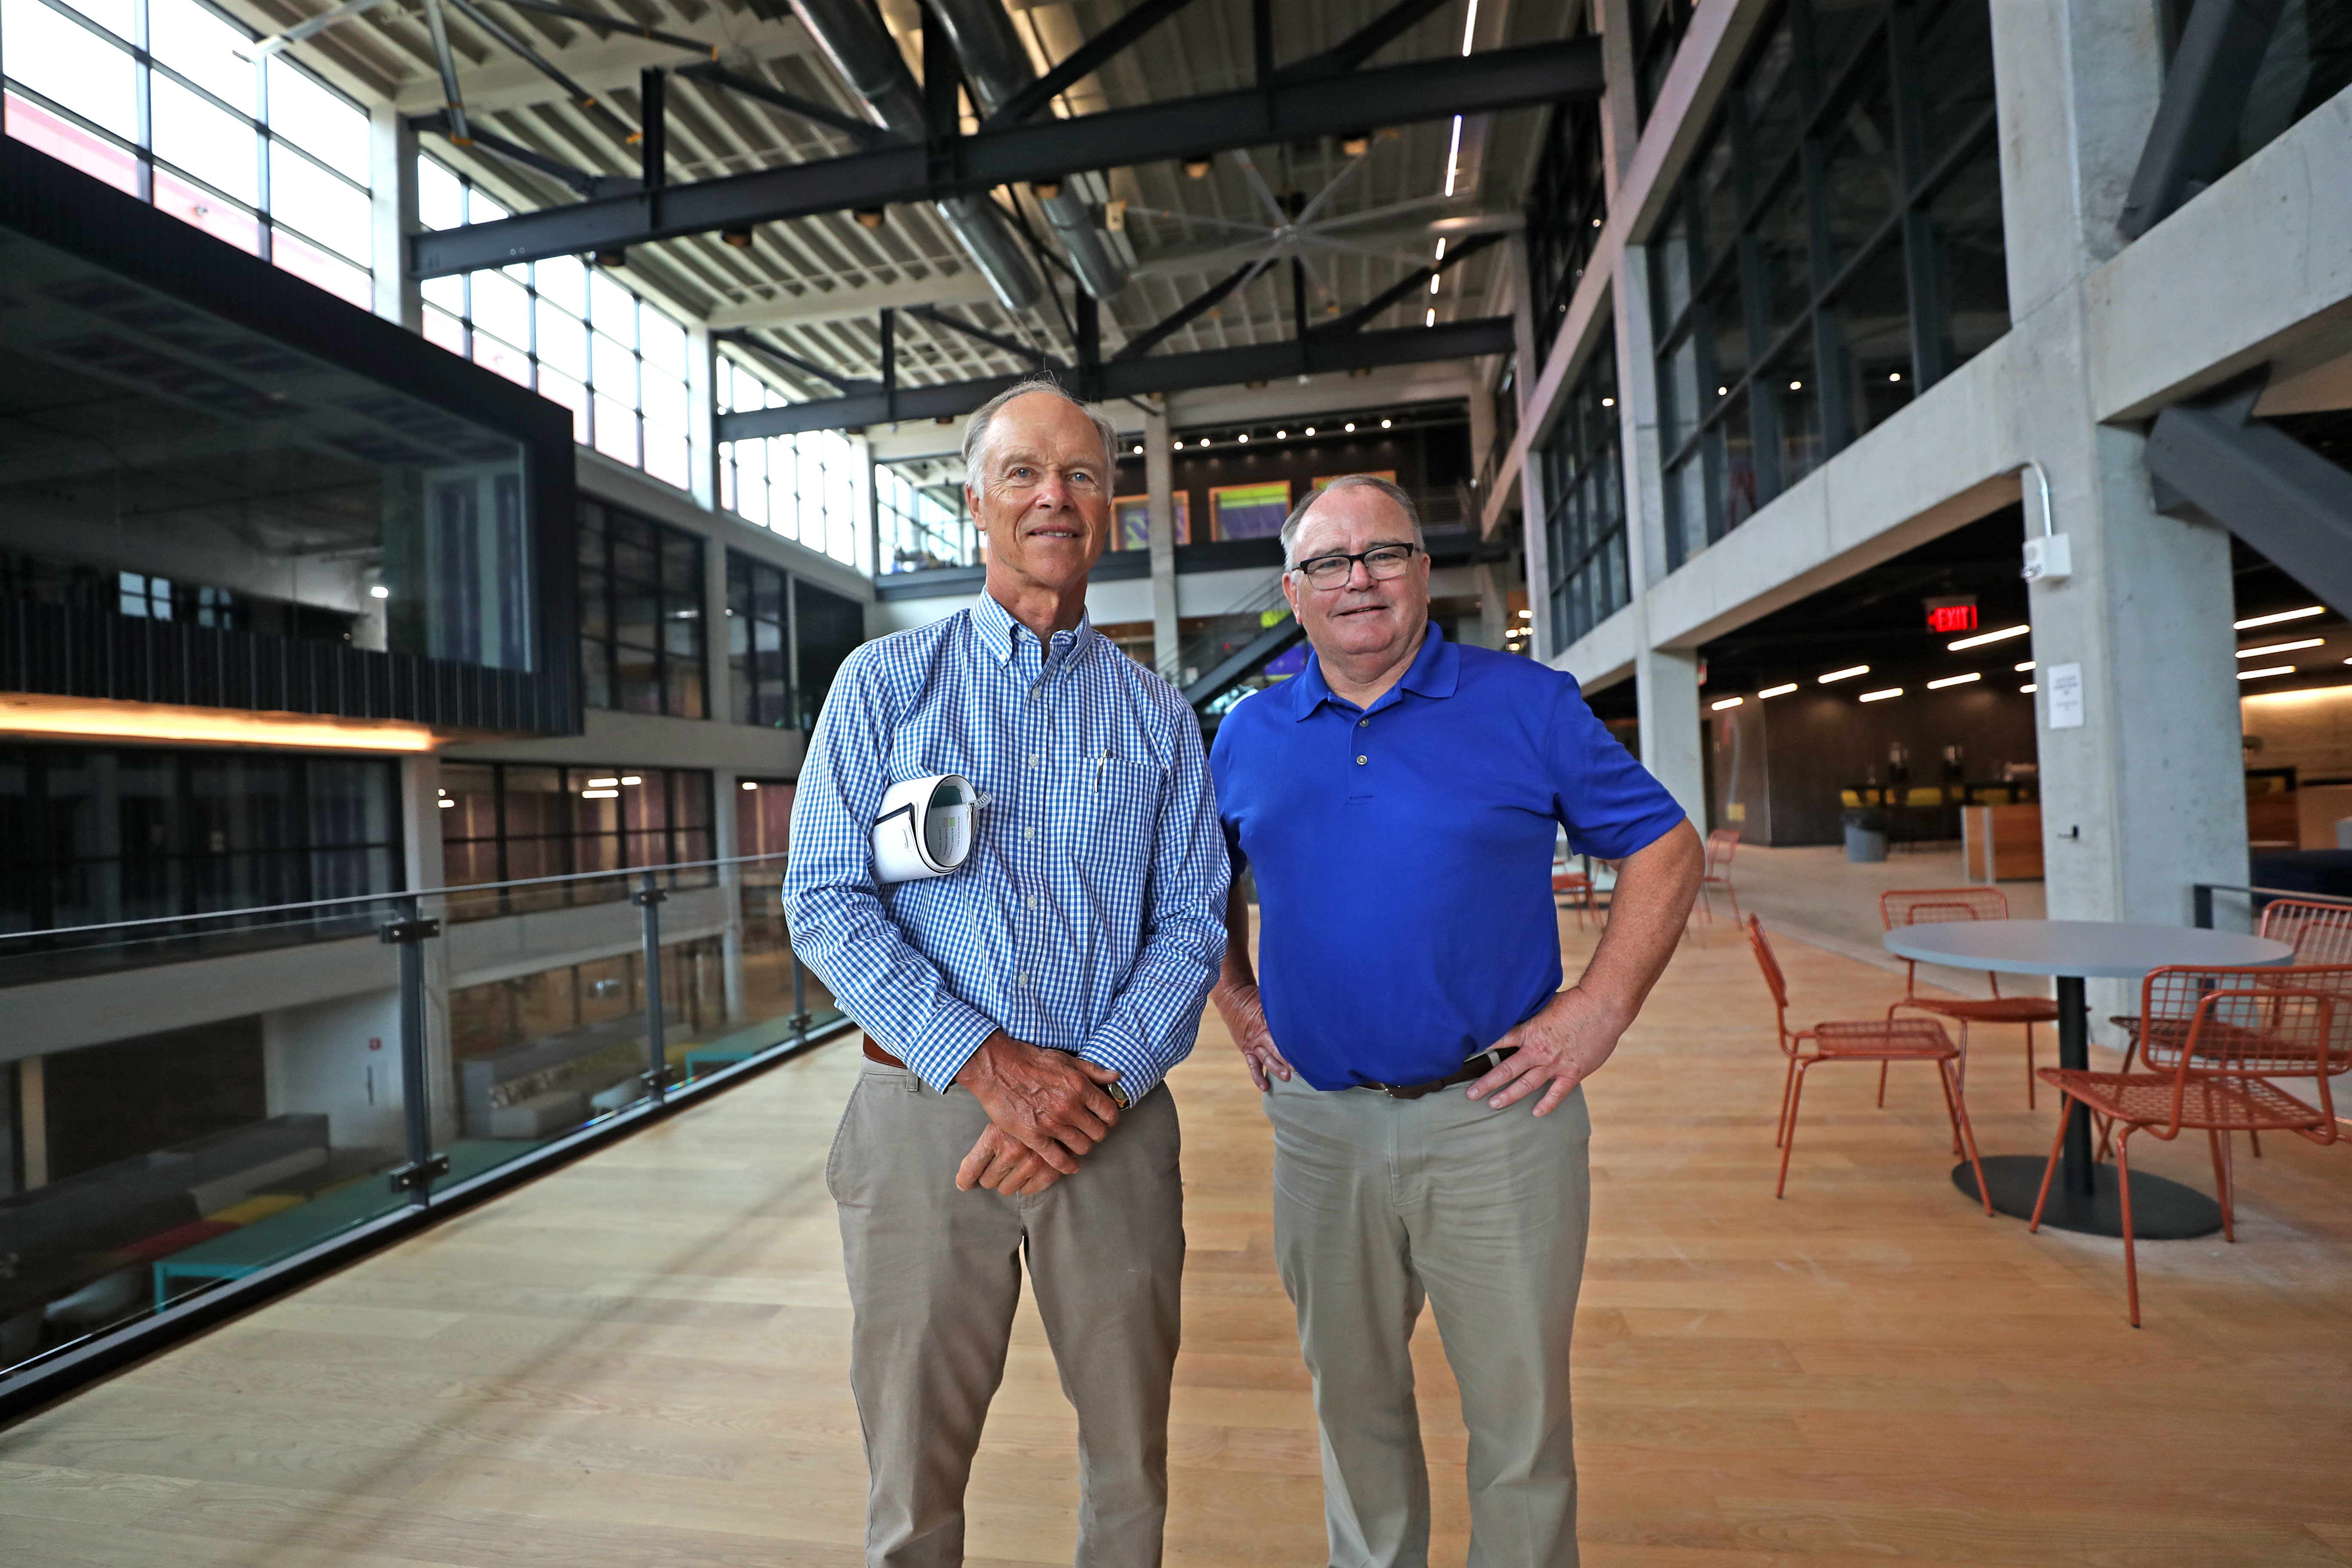 Ogden Hunnewell, executive vice president/partner at Nordblom and Stephen Logan, senior vice president, stood in the new space dubbed The Beat, former home of The Boston Globe.